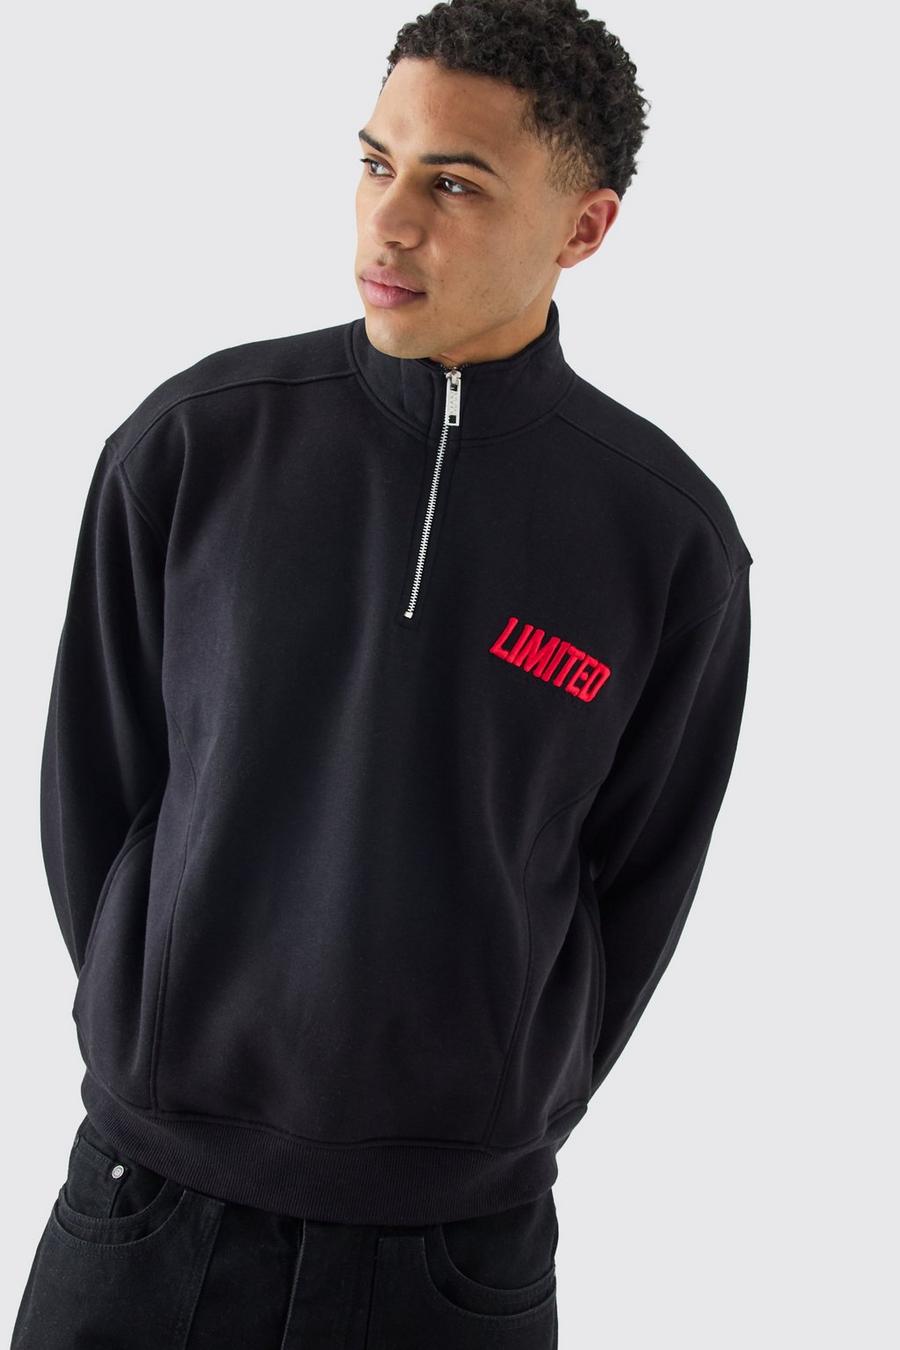 Black Oversized Boxy 1/4 Zip 3d Embroidered Official Sweatshirt